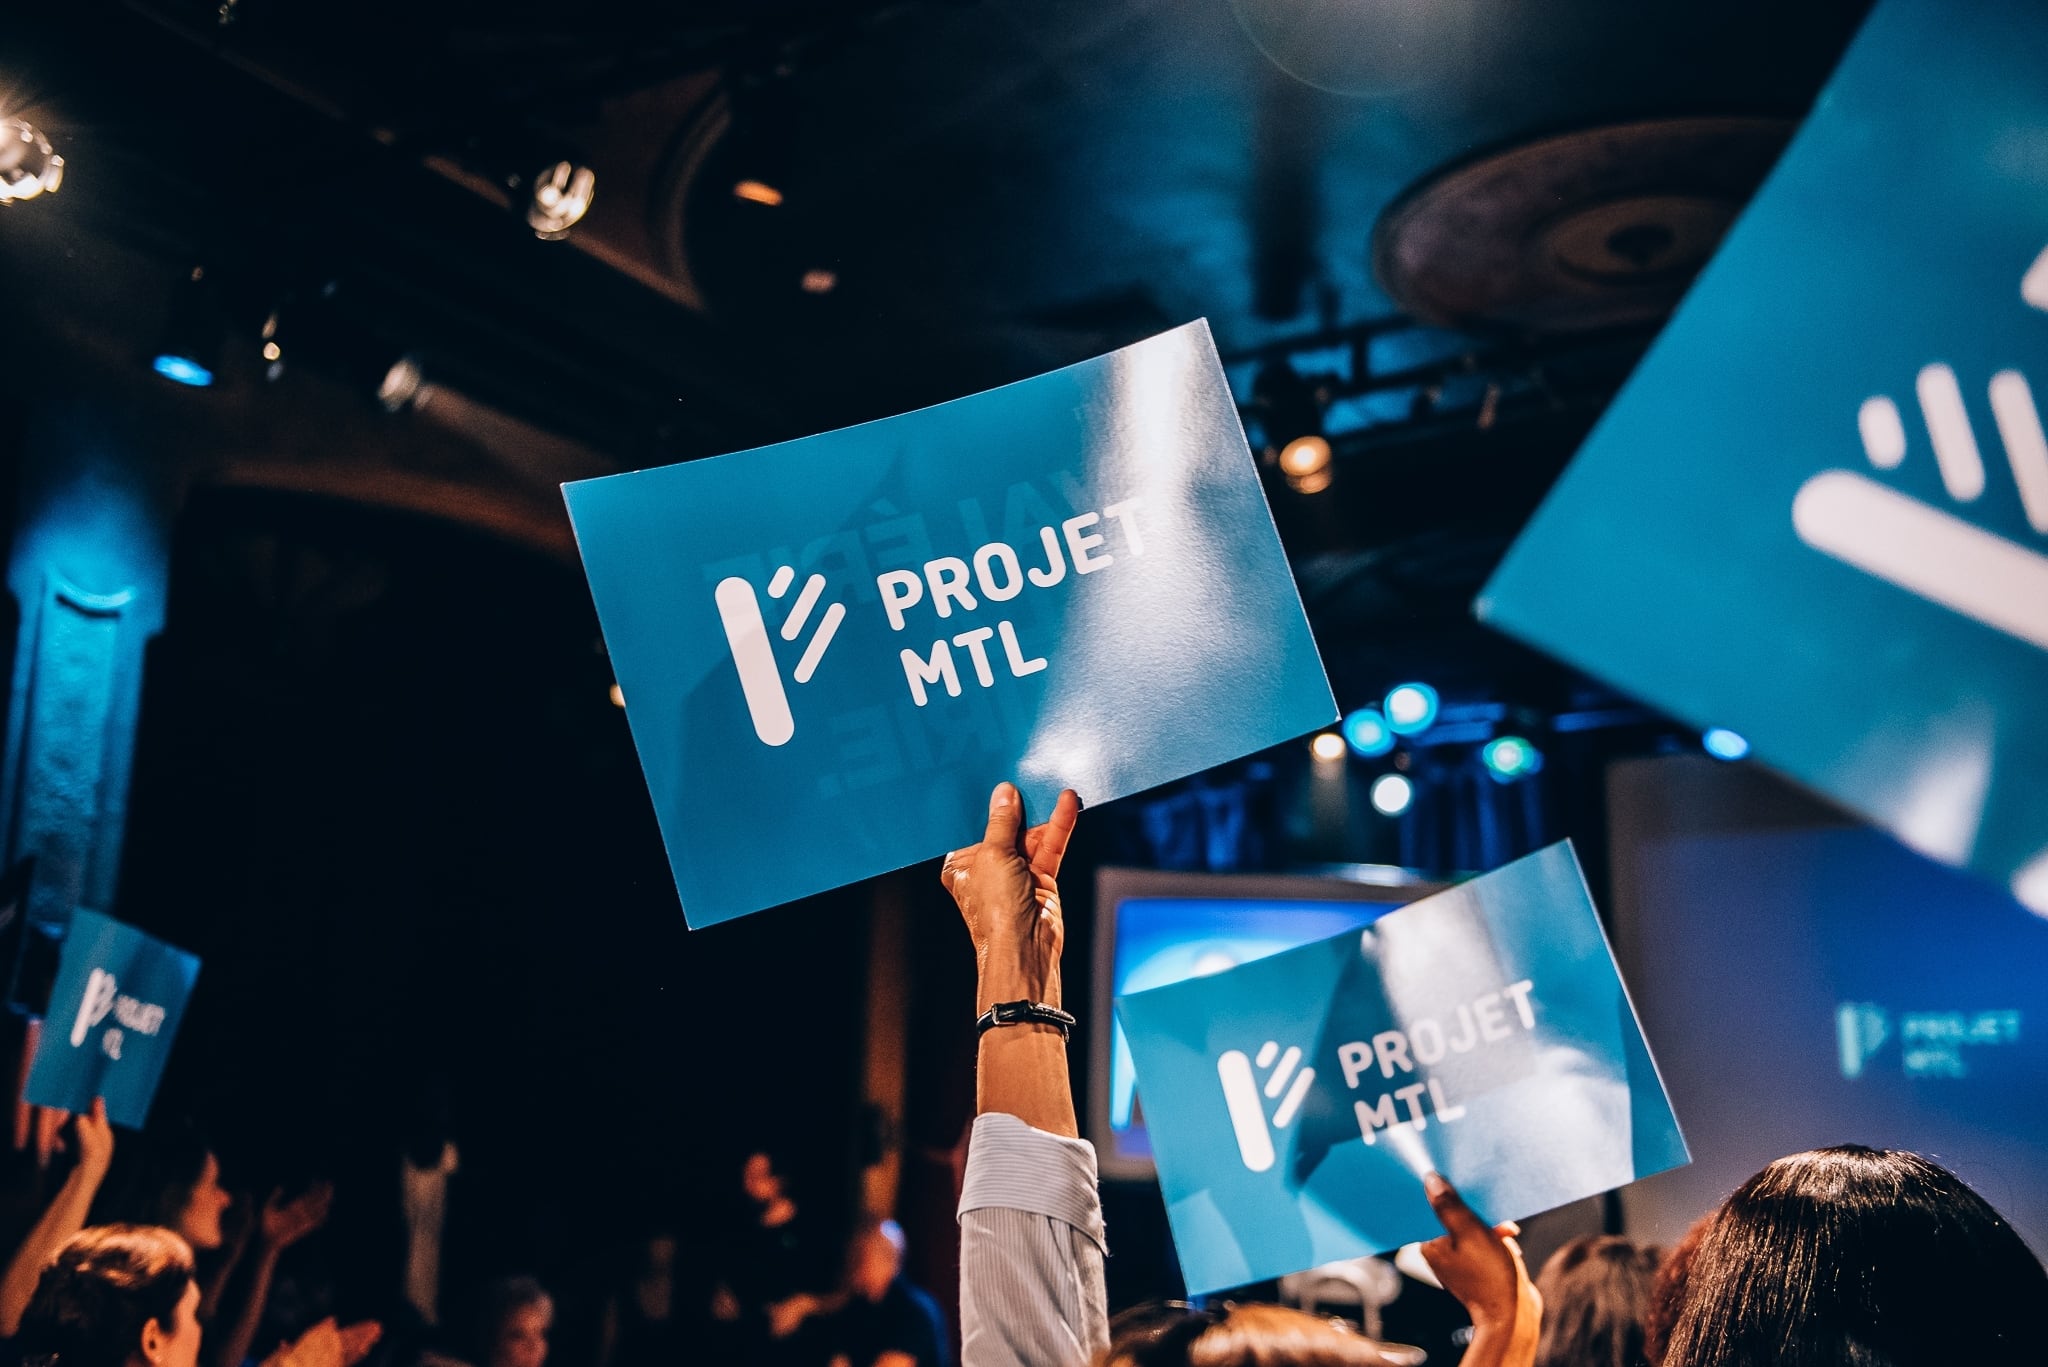 Projet Montréal breaks a historic fundraising record and is ready for the final stretch of the campaign